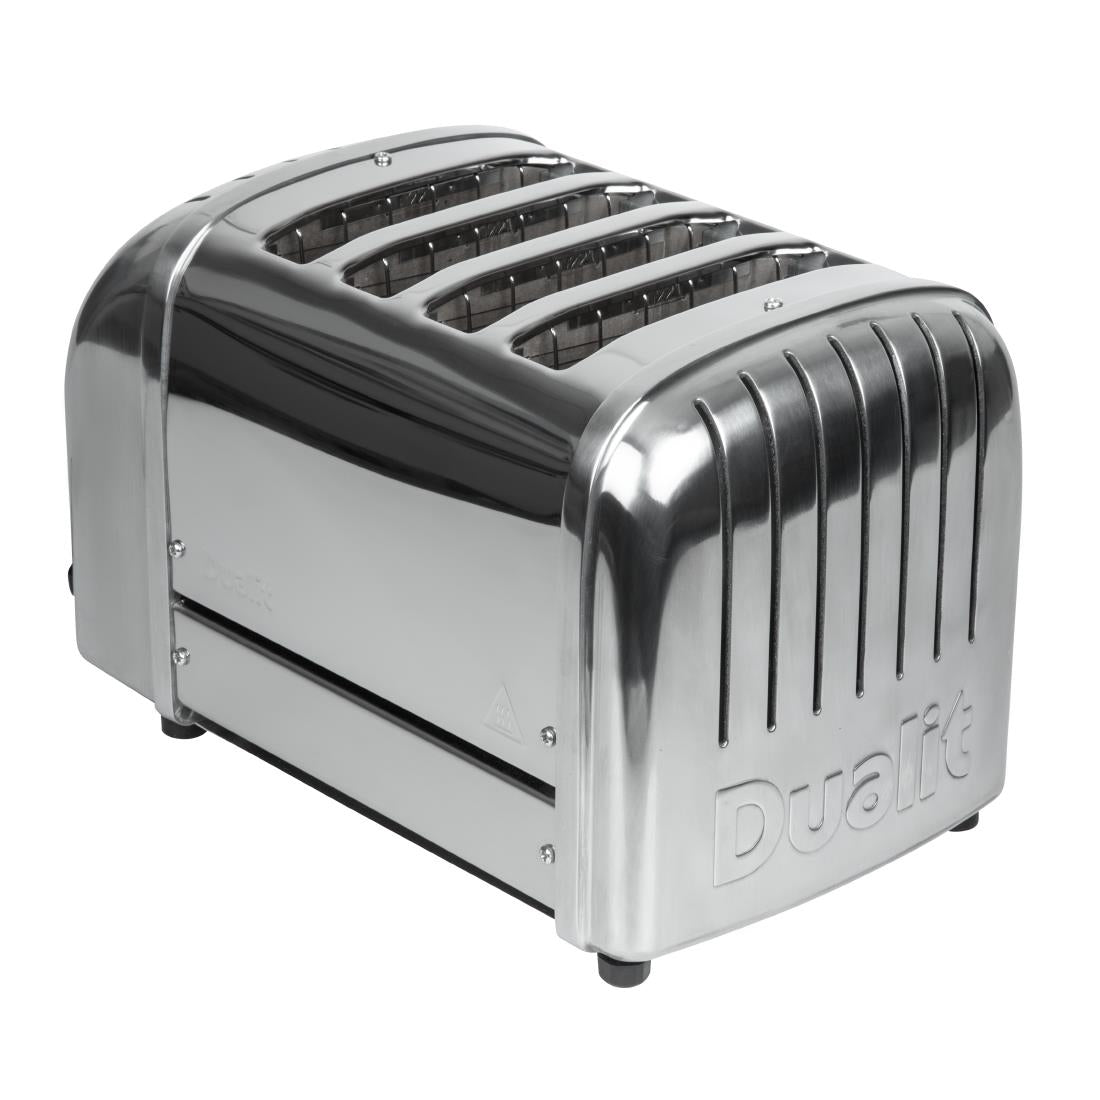 Dualit 2 x 2 Combi Vario 4 Slice Toaster Stainless 42174 JD Catering Equipment Solutions Ltd